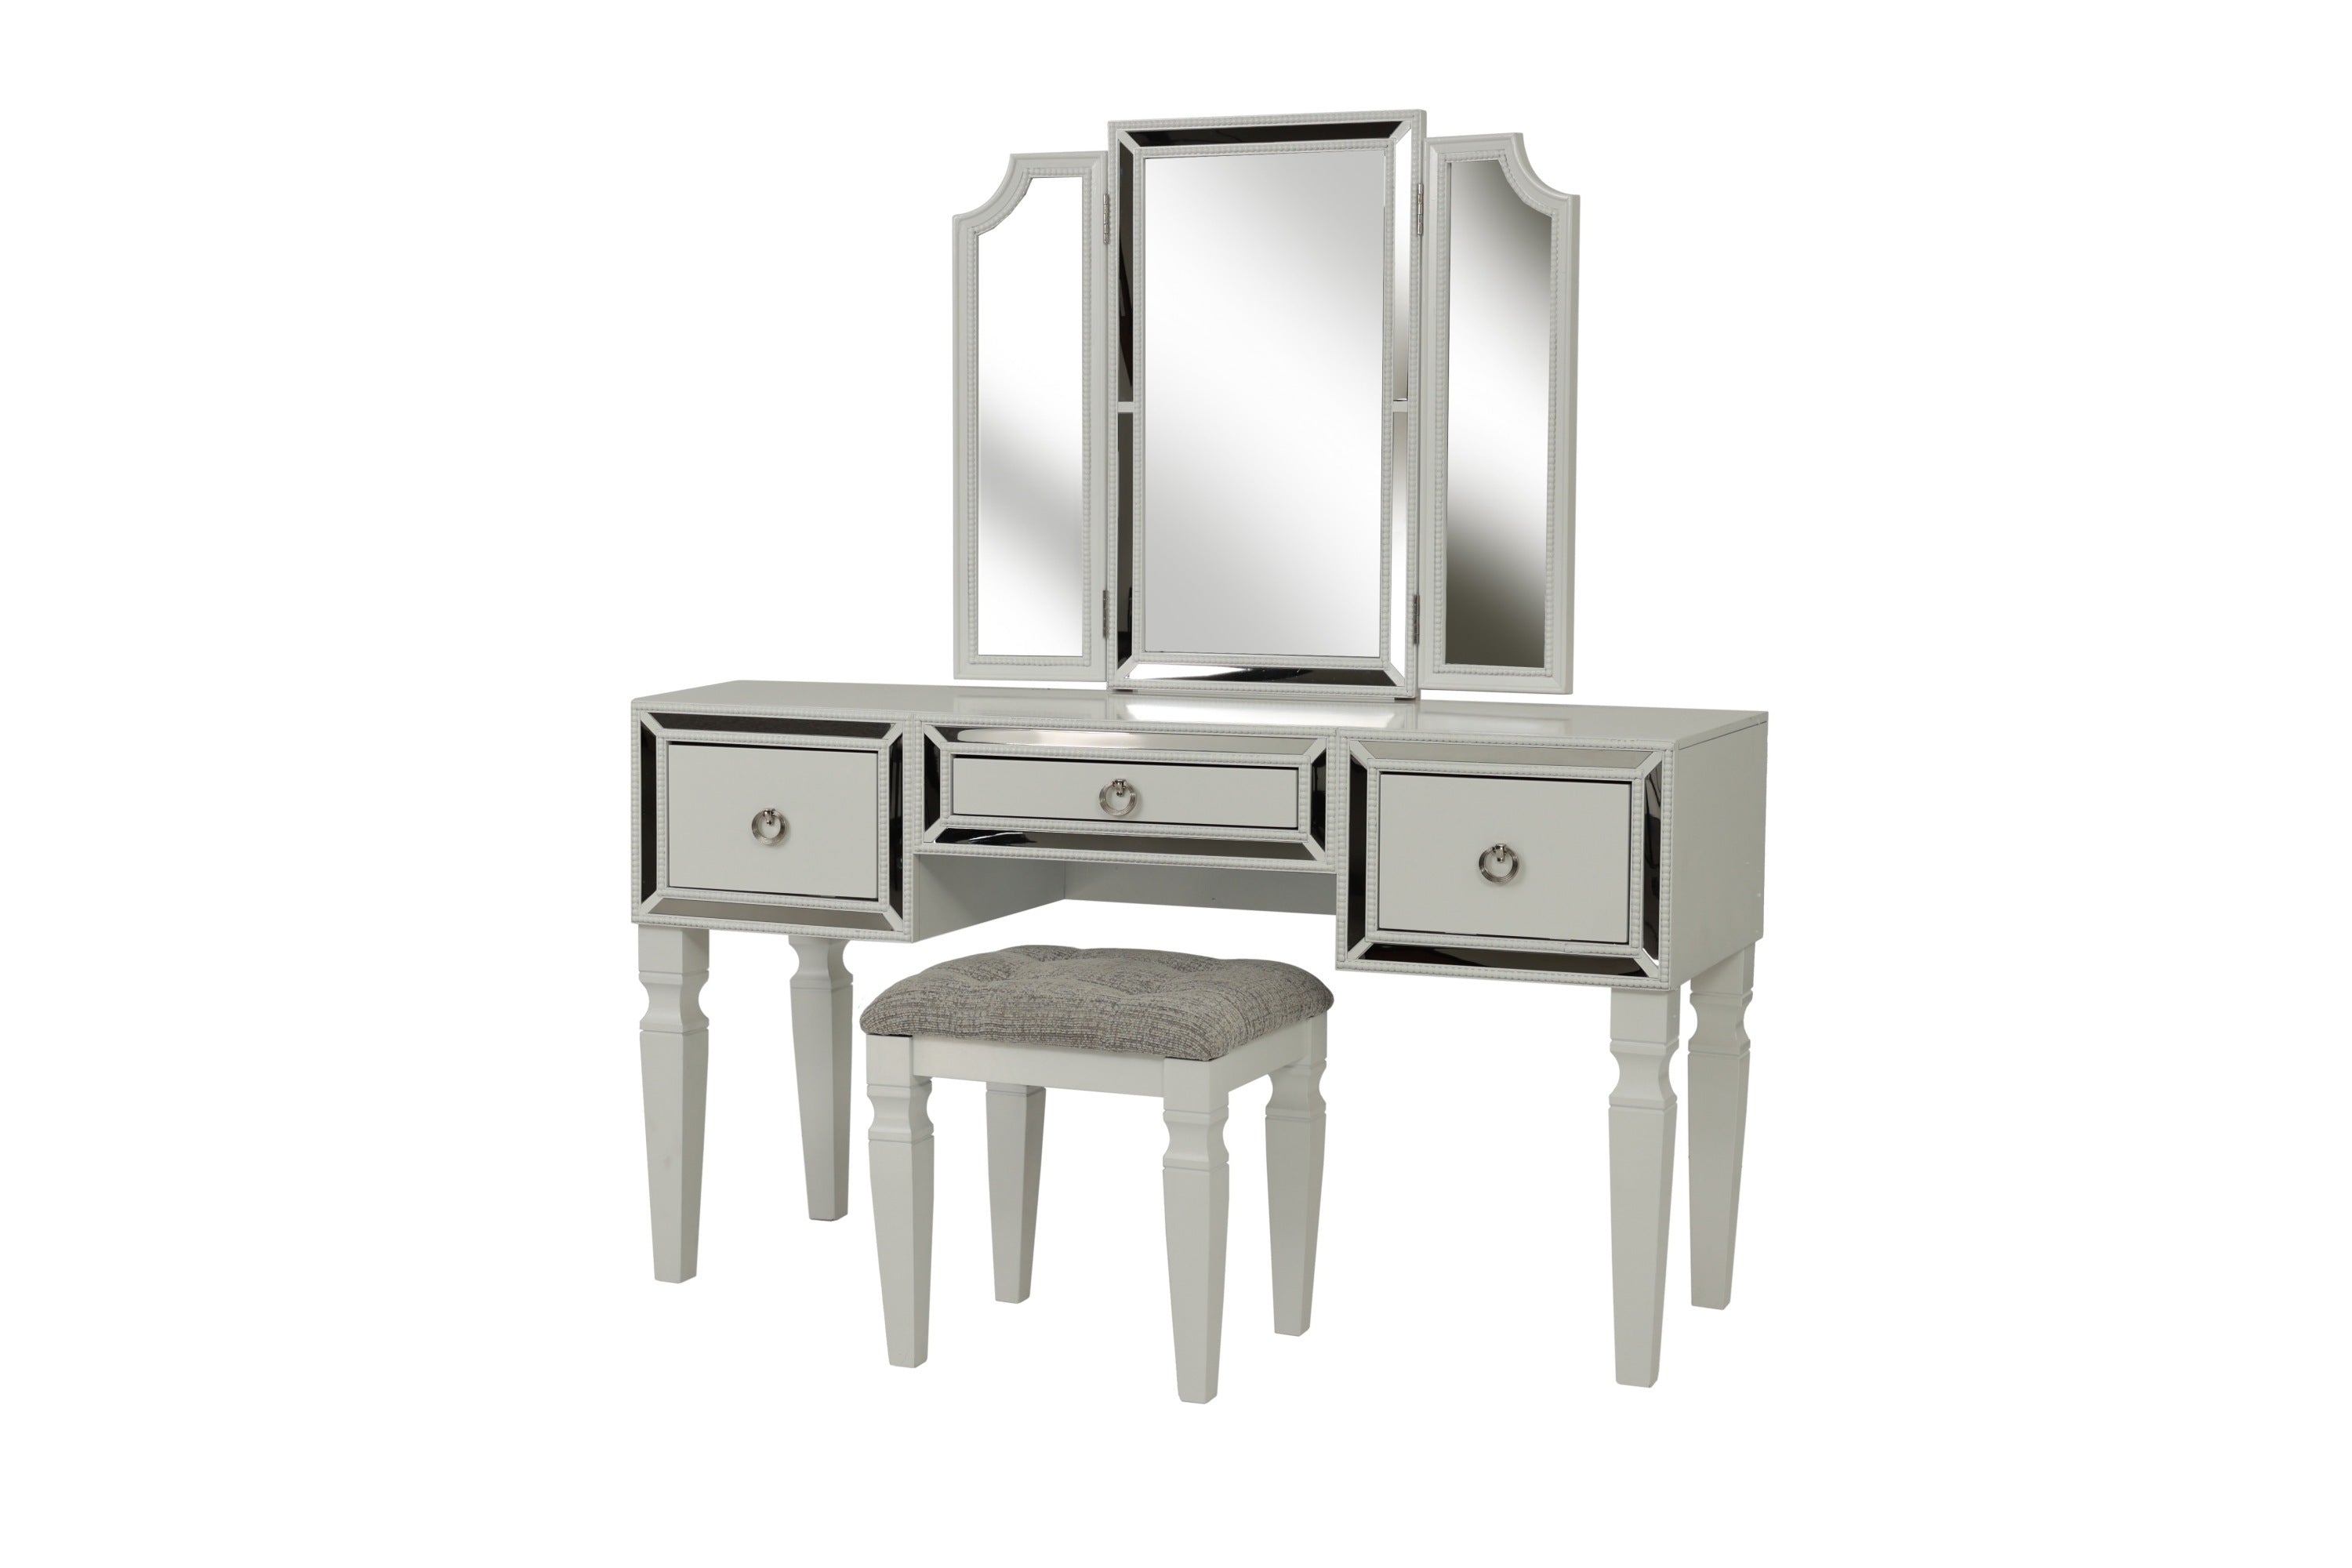 Luxurious Majestic Classic White Color Vanity Set w Stool 3-Storage Drawers 1pc Bedroom Furniture Set Tri-Fold Mirror